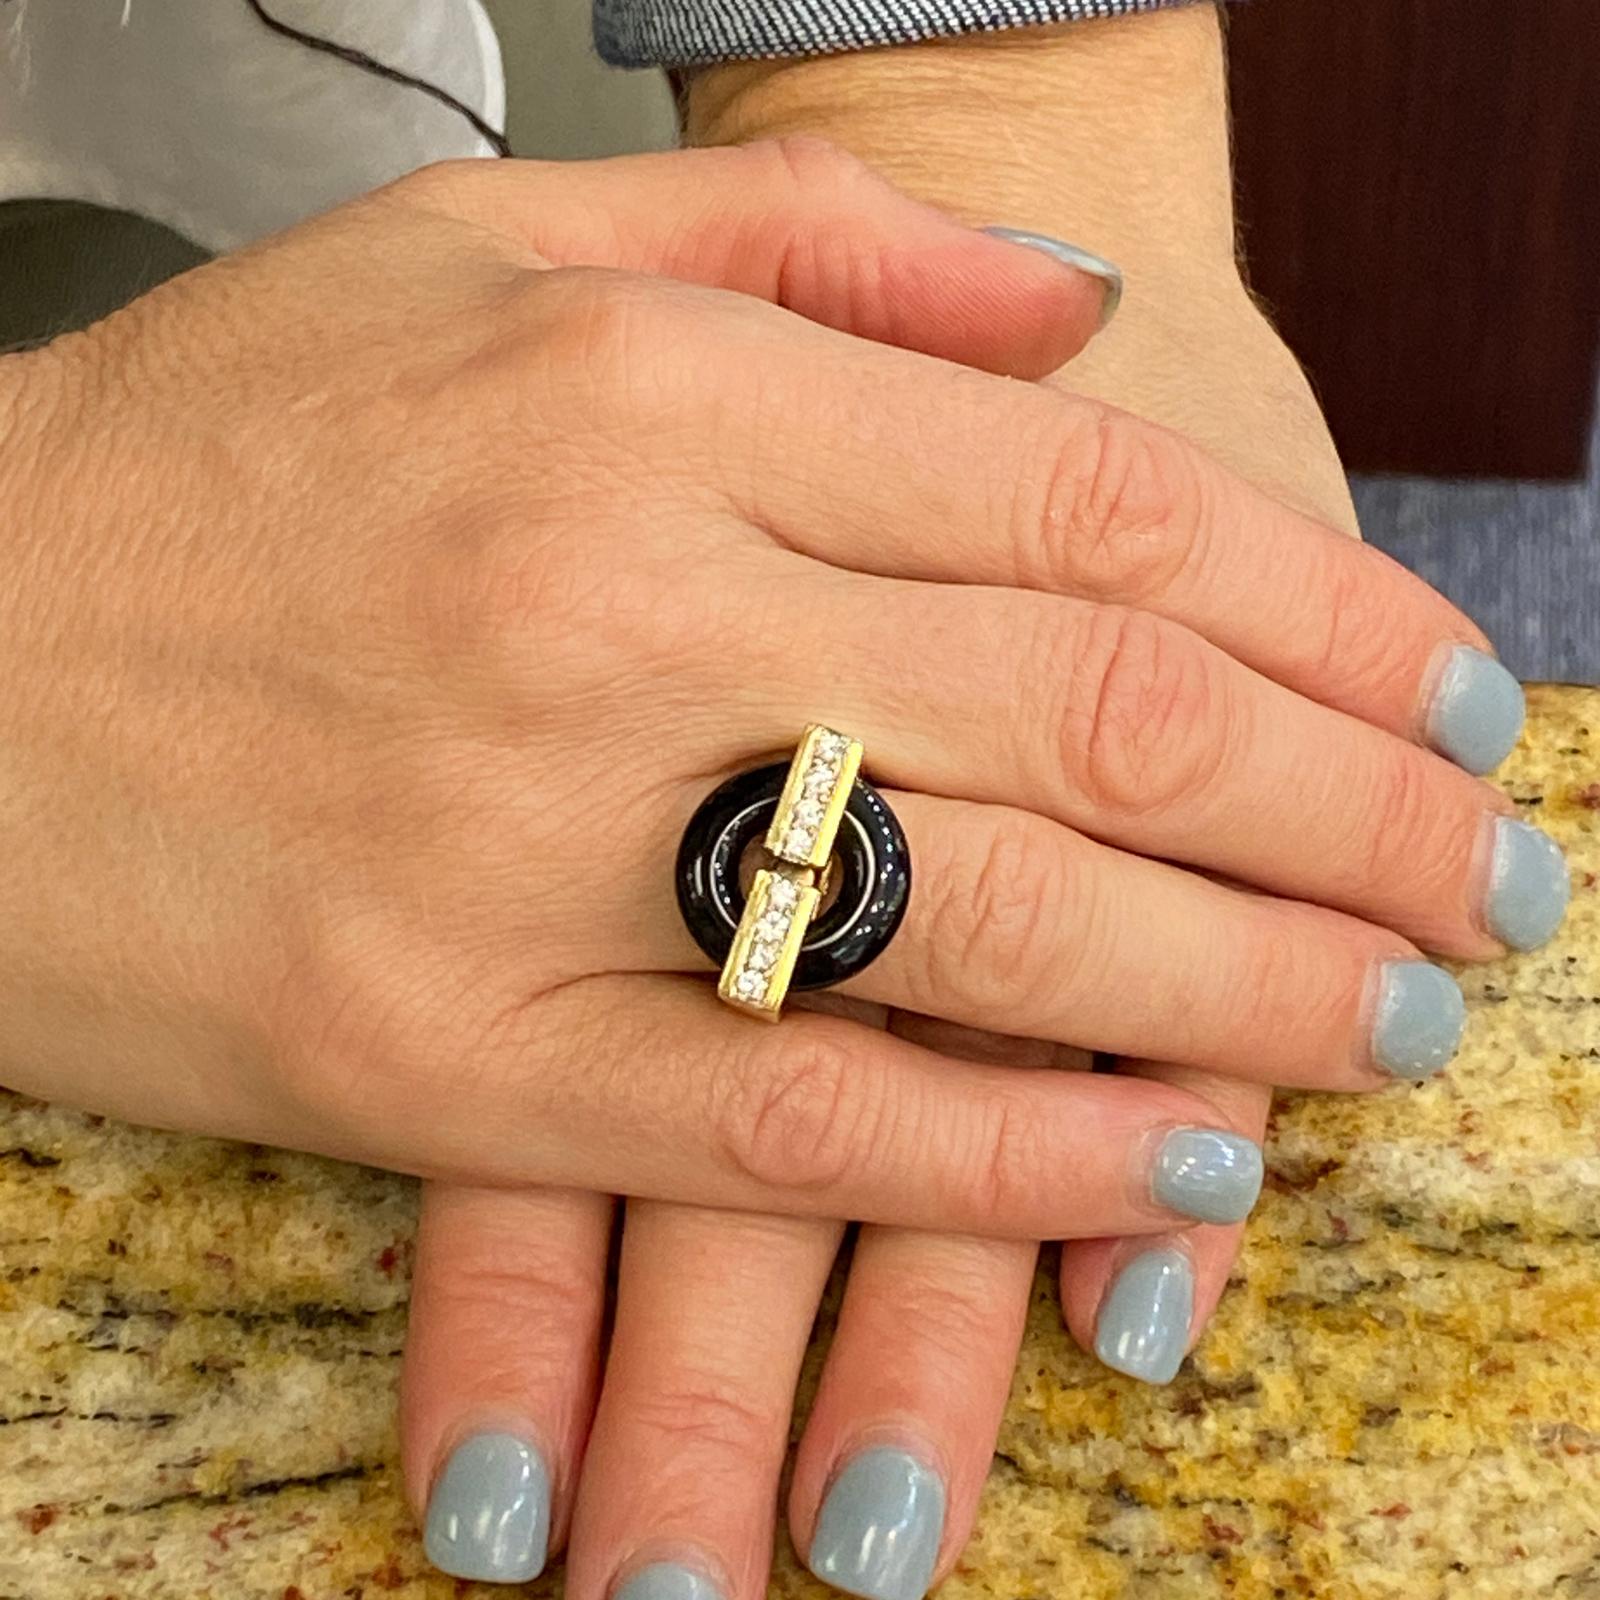 Fabulous 1960's diamond and onyx ring fashioned in 14 karat yellow gold. The ring features 8 round brilliant cut diamonds weighing .40 carat total weight and graded F-G color and VS clarity. The diamonds are set in a row across an open onyx circle.